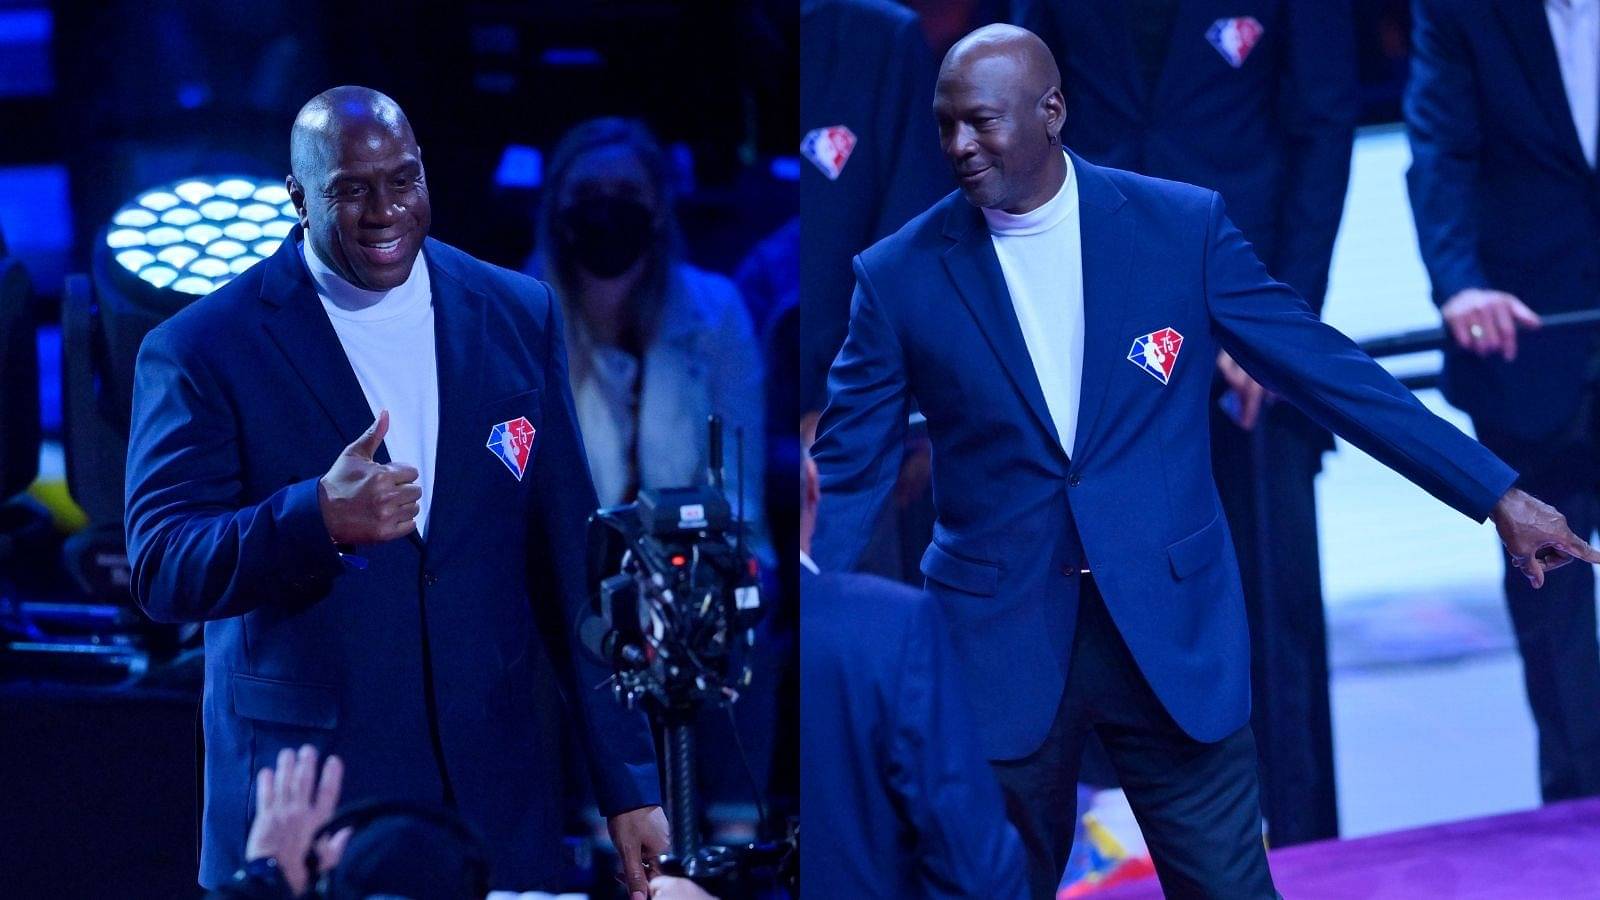 Michael Jordan never forgets to challenge his friends and former opponents, he was at it again, and Magic Johnson is in the receiving end this time.